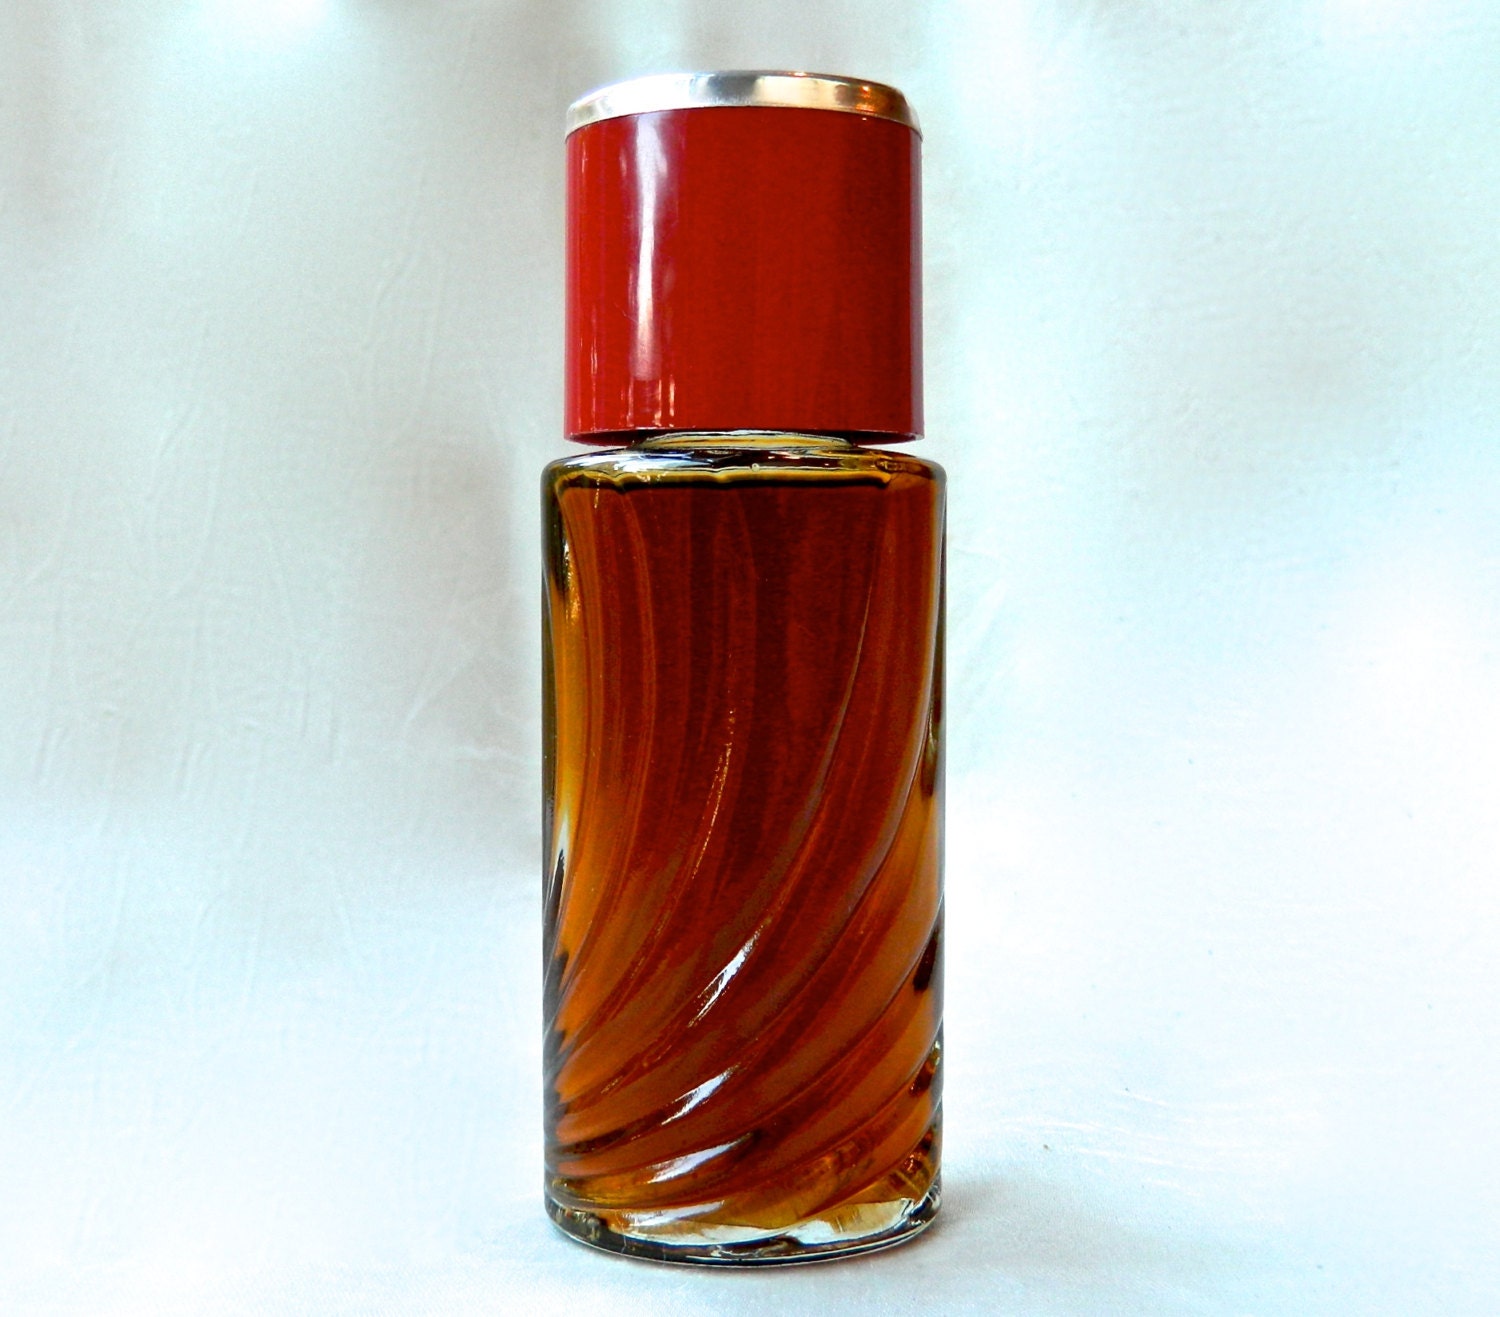 Vintage Scoundrel Perfume by Revlon Concentrated Cologne by ODONA